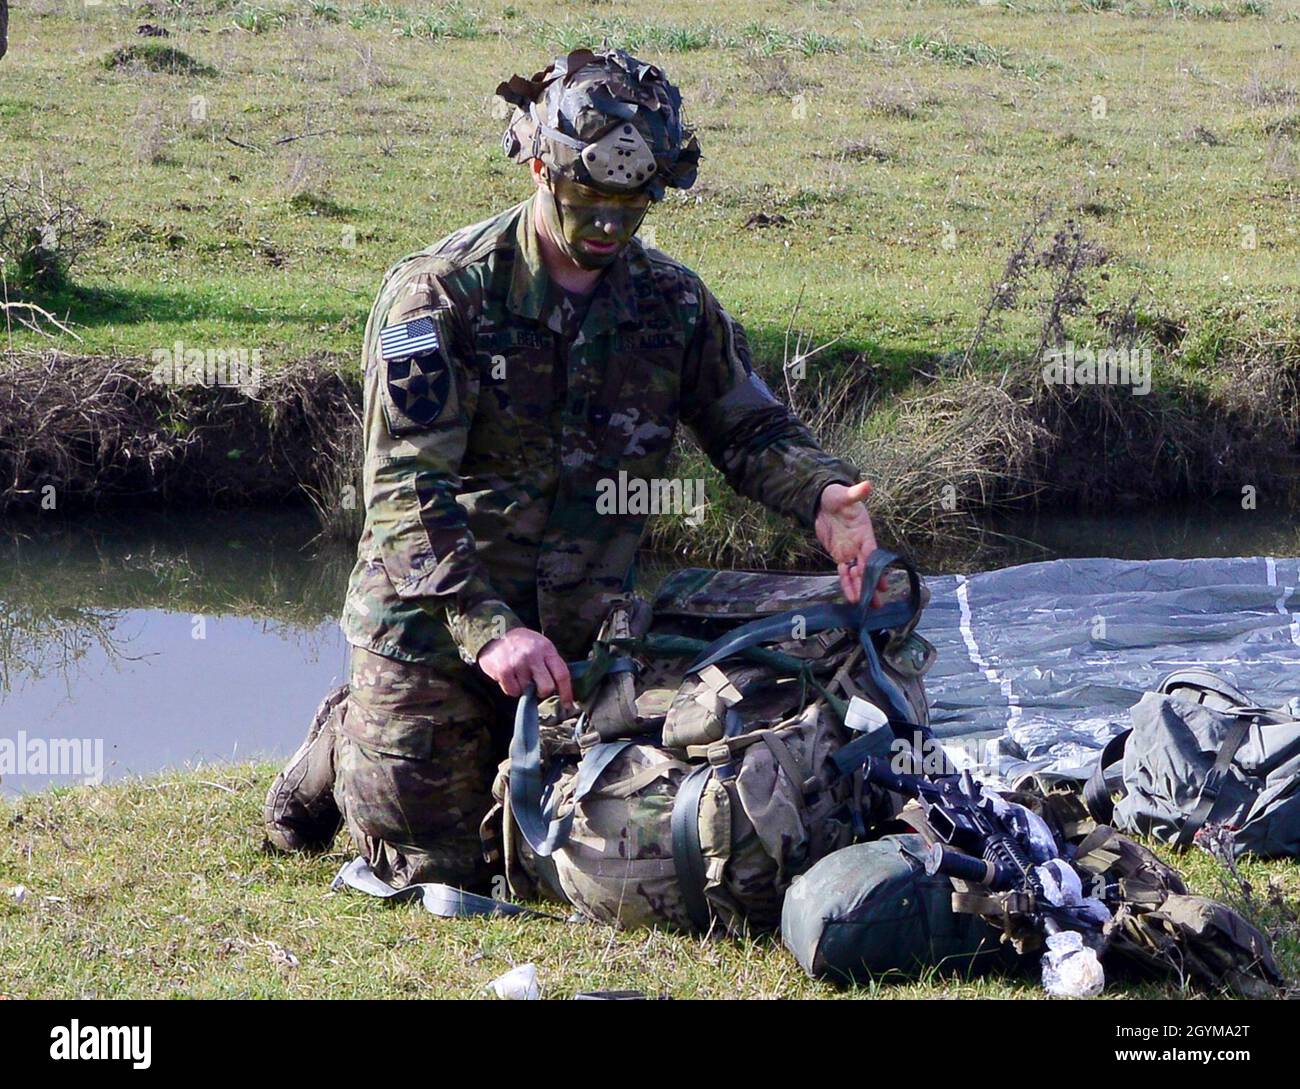 A U.S. Army paratrooper from HHC, 2nd Battalion, 503rd  Infantry Regiment, 173rd Airborne Brigade recovers his parachute after the airborne operation  during Exercise Rock Topside 20, Monte Romano, Italy, Jan. 29, 2020.Rock Topside is a joint forced entry exercise to train the battalion’s ability to conduct airborne contingency response force operations. This training stresses the interoperability of both the paratroopers of the 2nd Battalion, 503rd Infantry Regiment and Italian paratroopers of Reggimento Savoia Cavalleria 3. (U.S Army photo by Elena Baladelli) Stock Photo